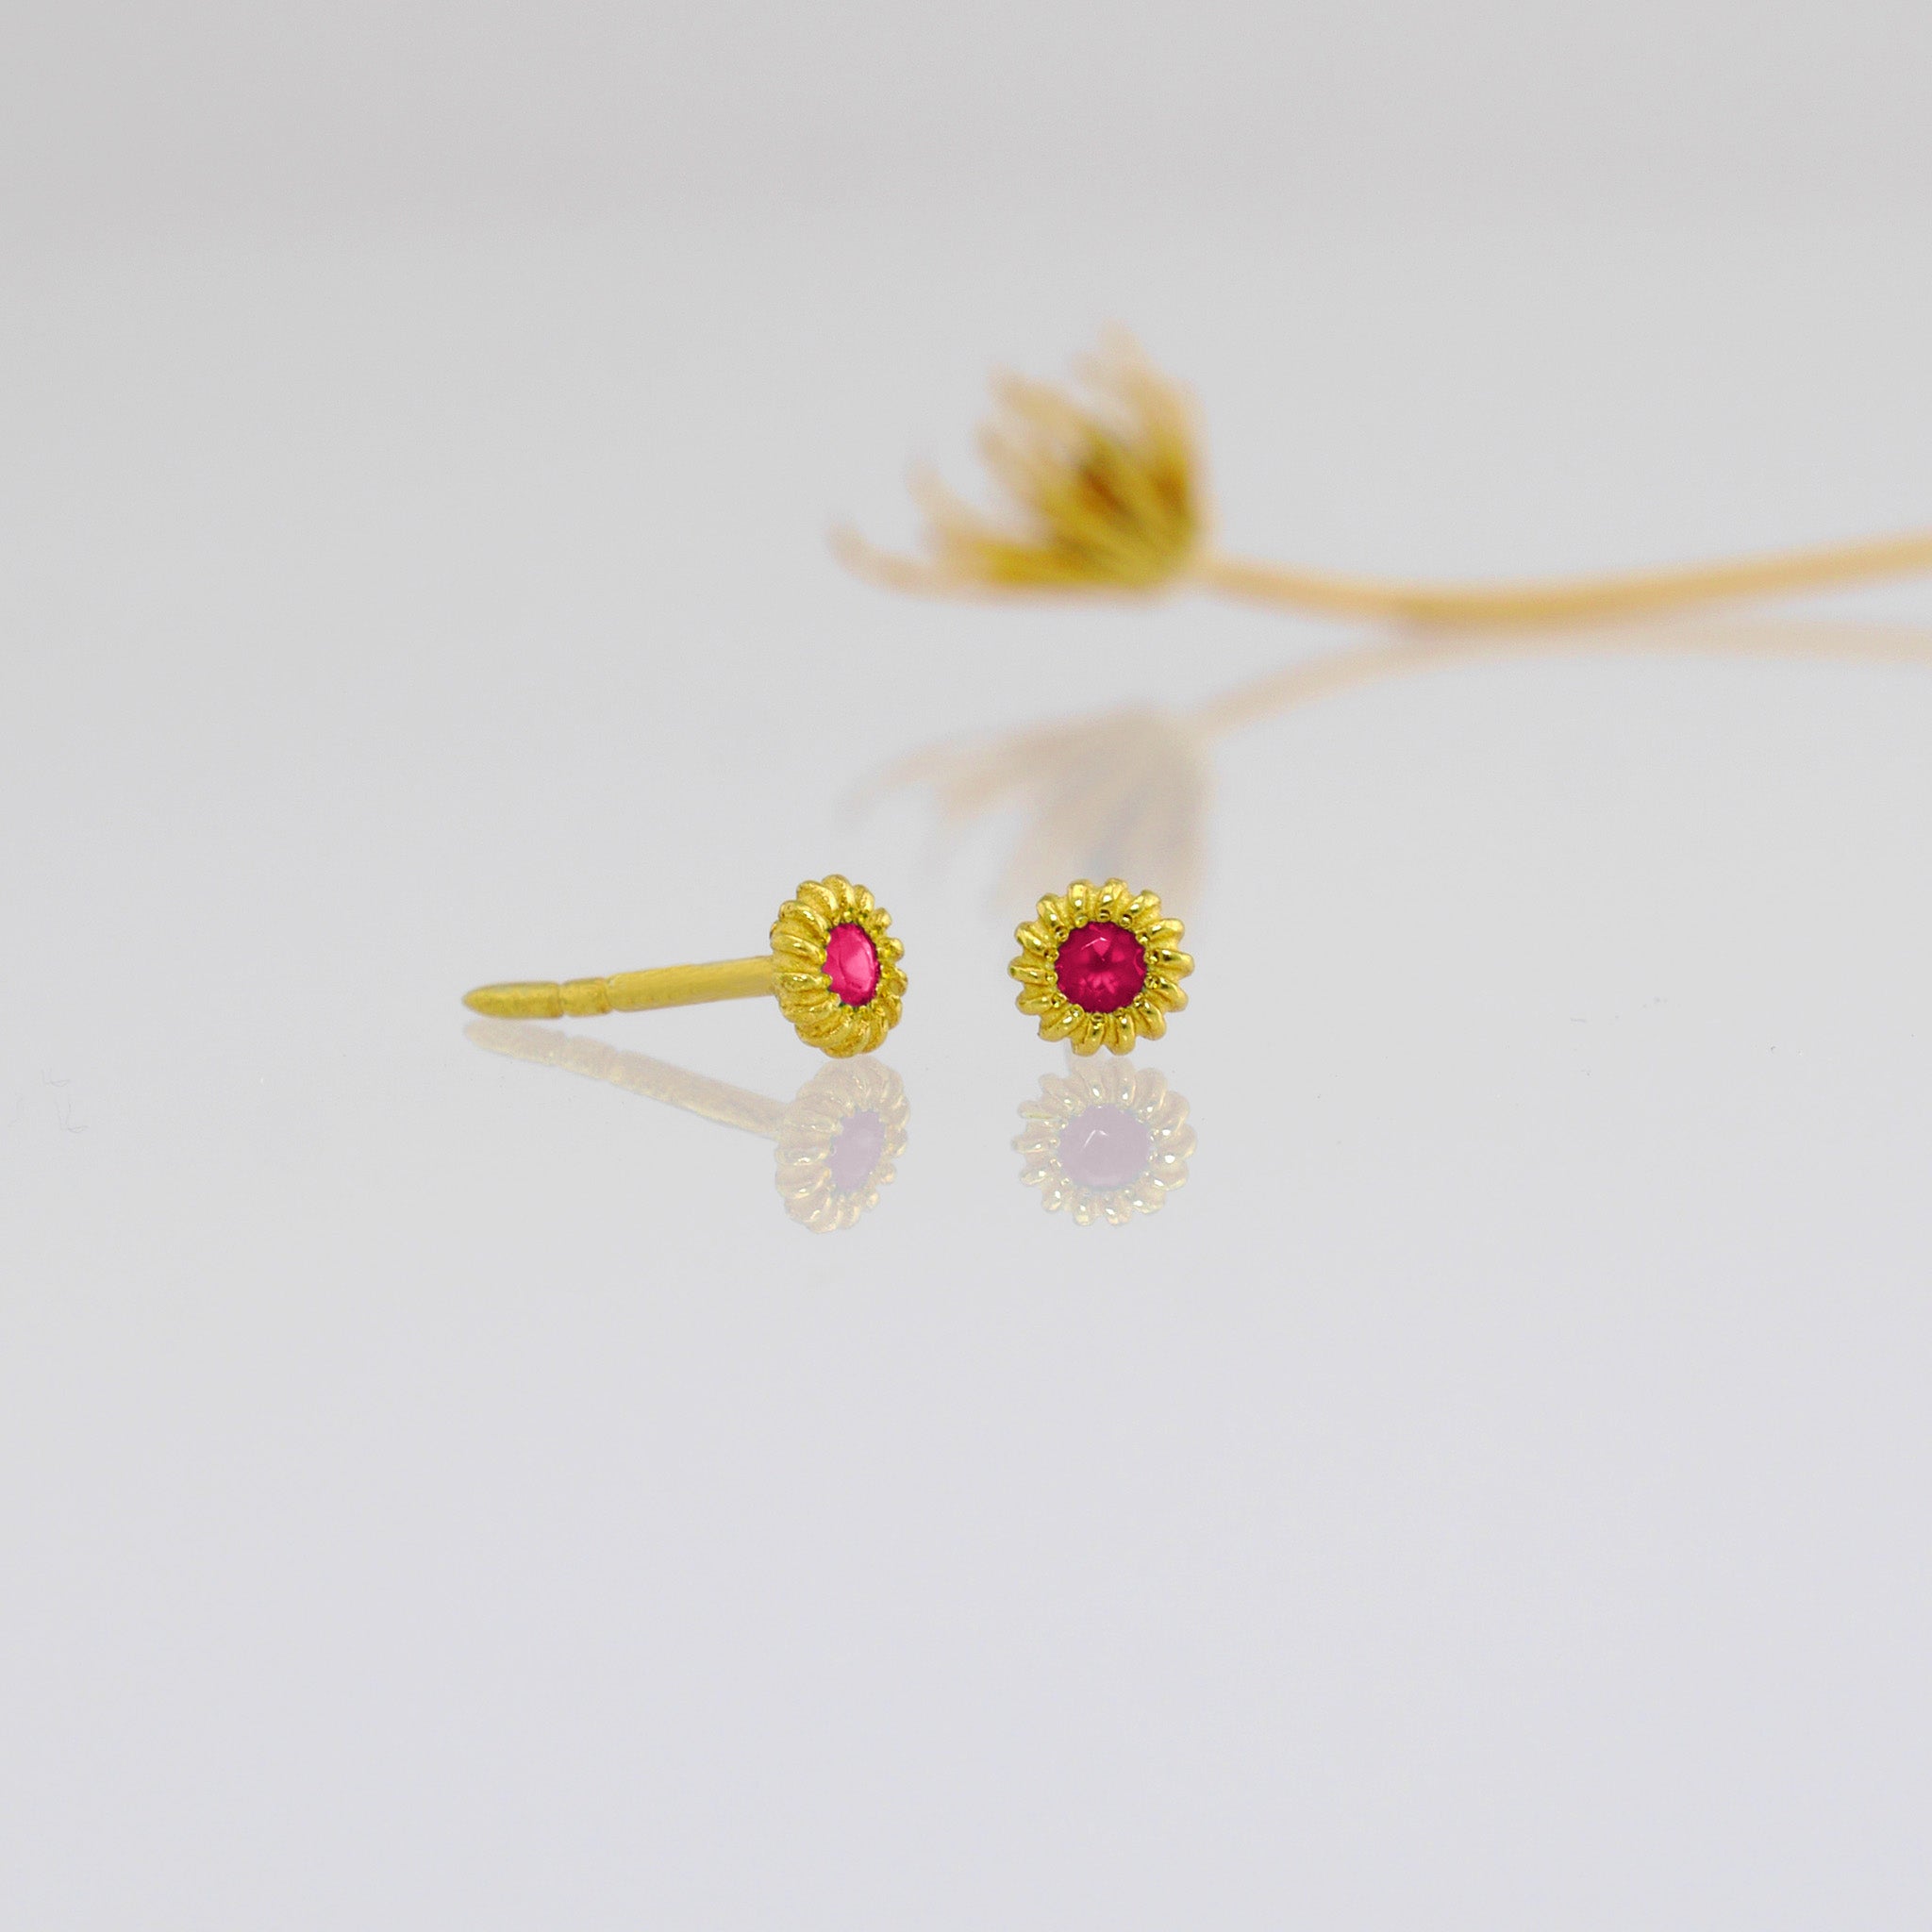 Tiny, coiled 18k gold studs with Ruby.